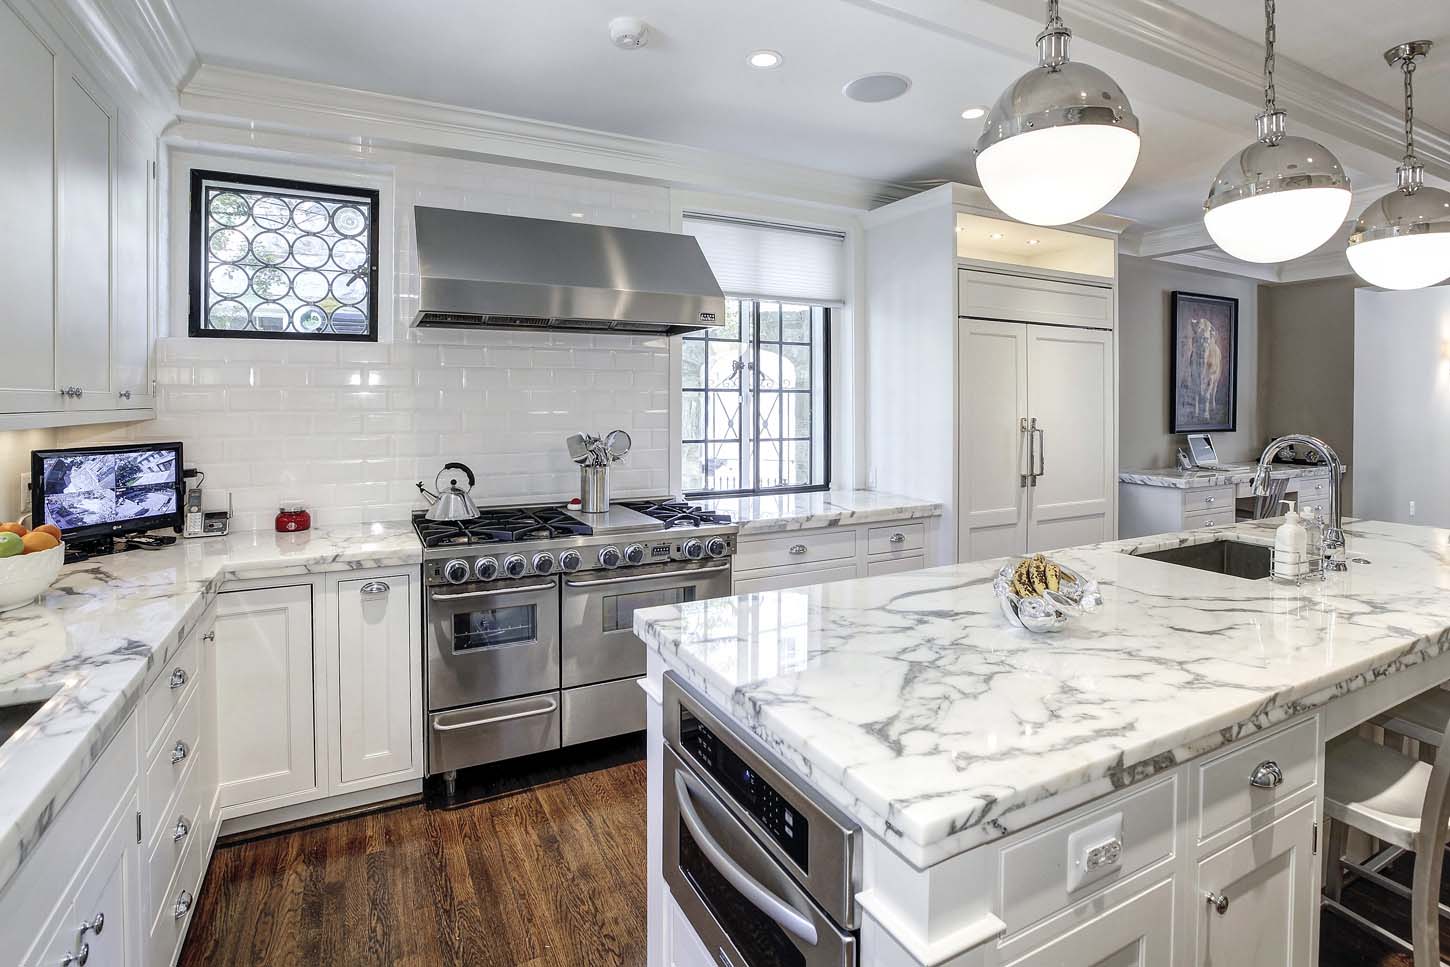 Marble Countertops Laguna Kitchen And Bath Design And Remodeling